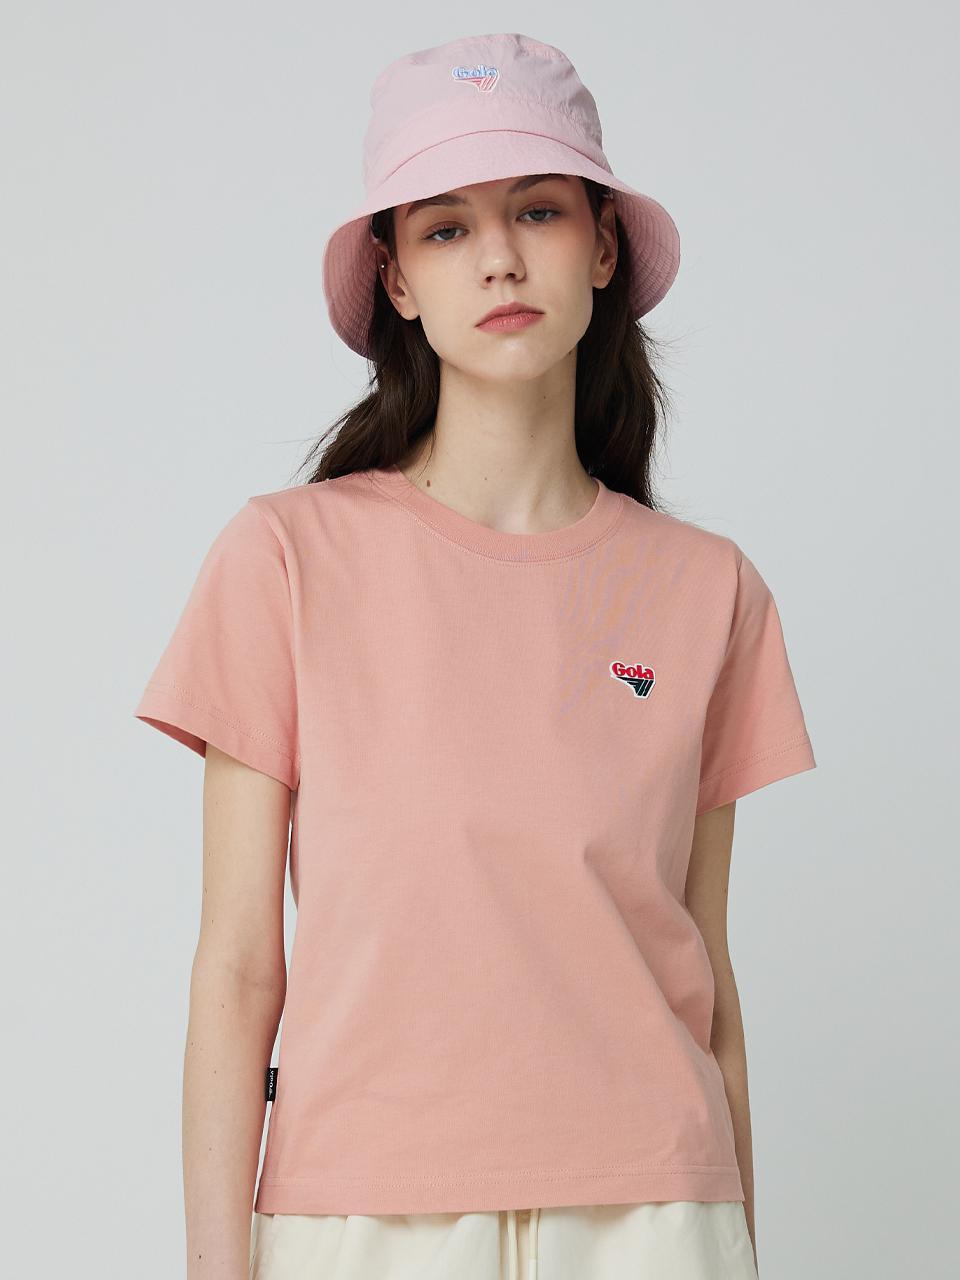 W SMALL LOGO T-SHIRTS [INDIE PINK]